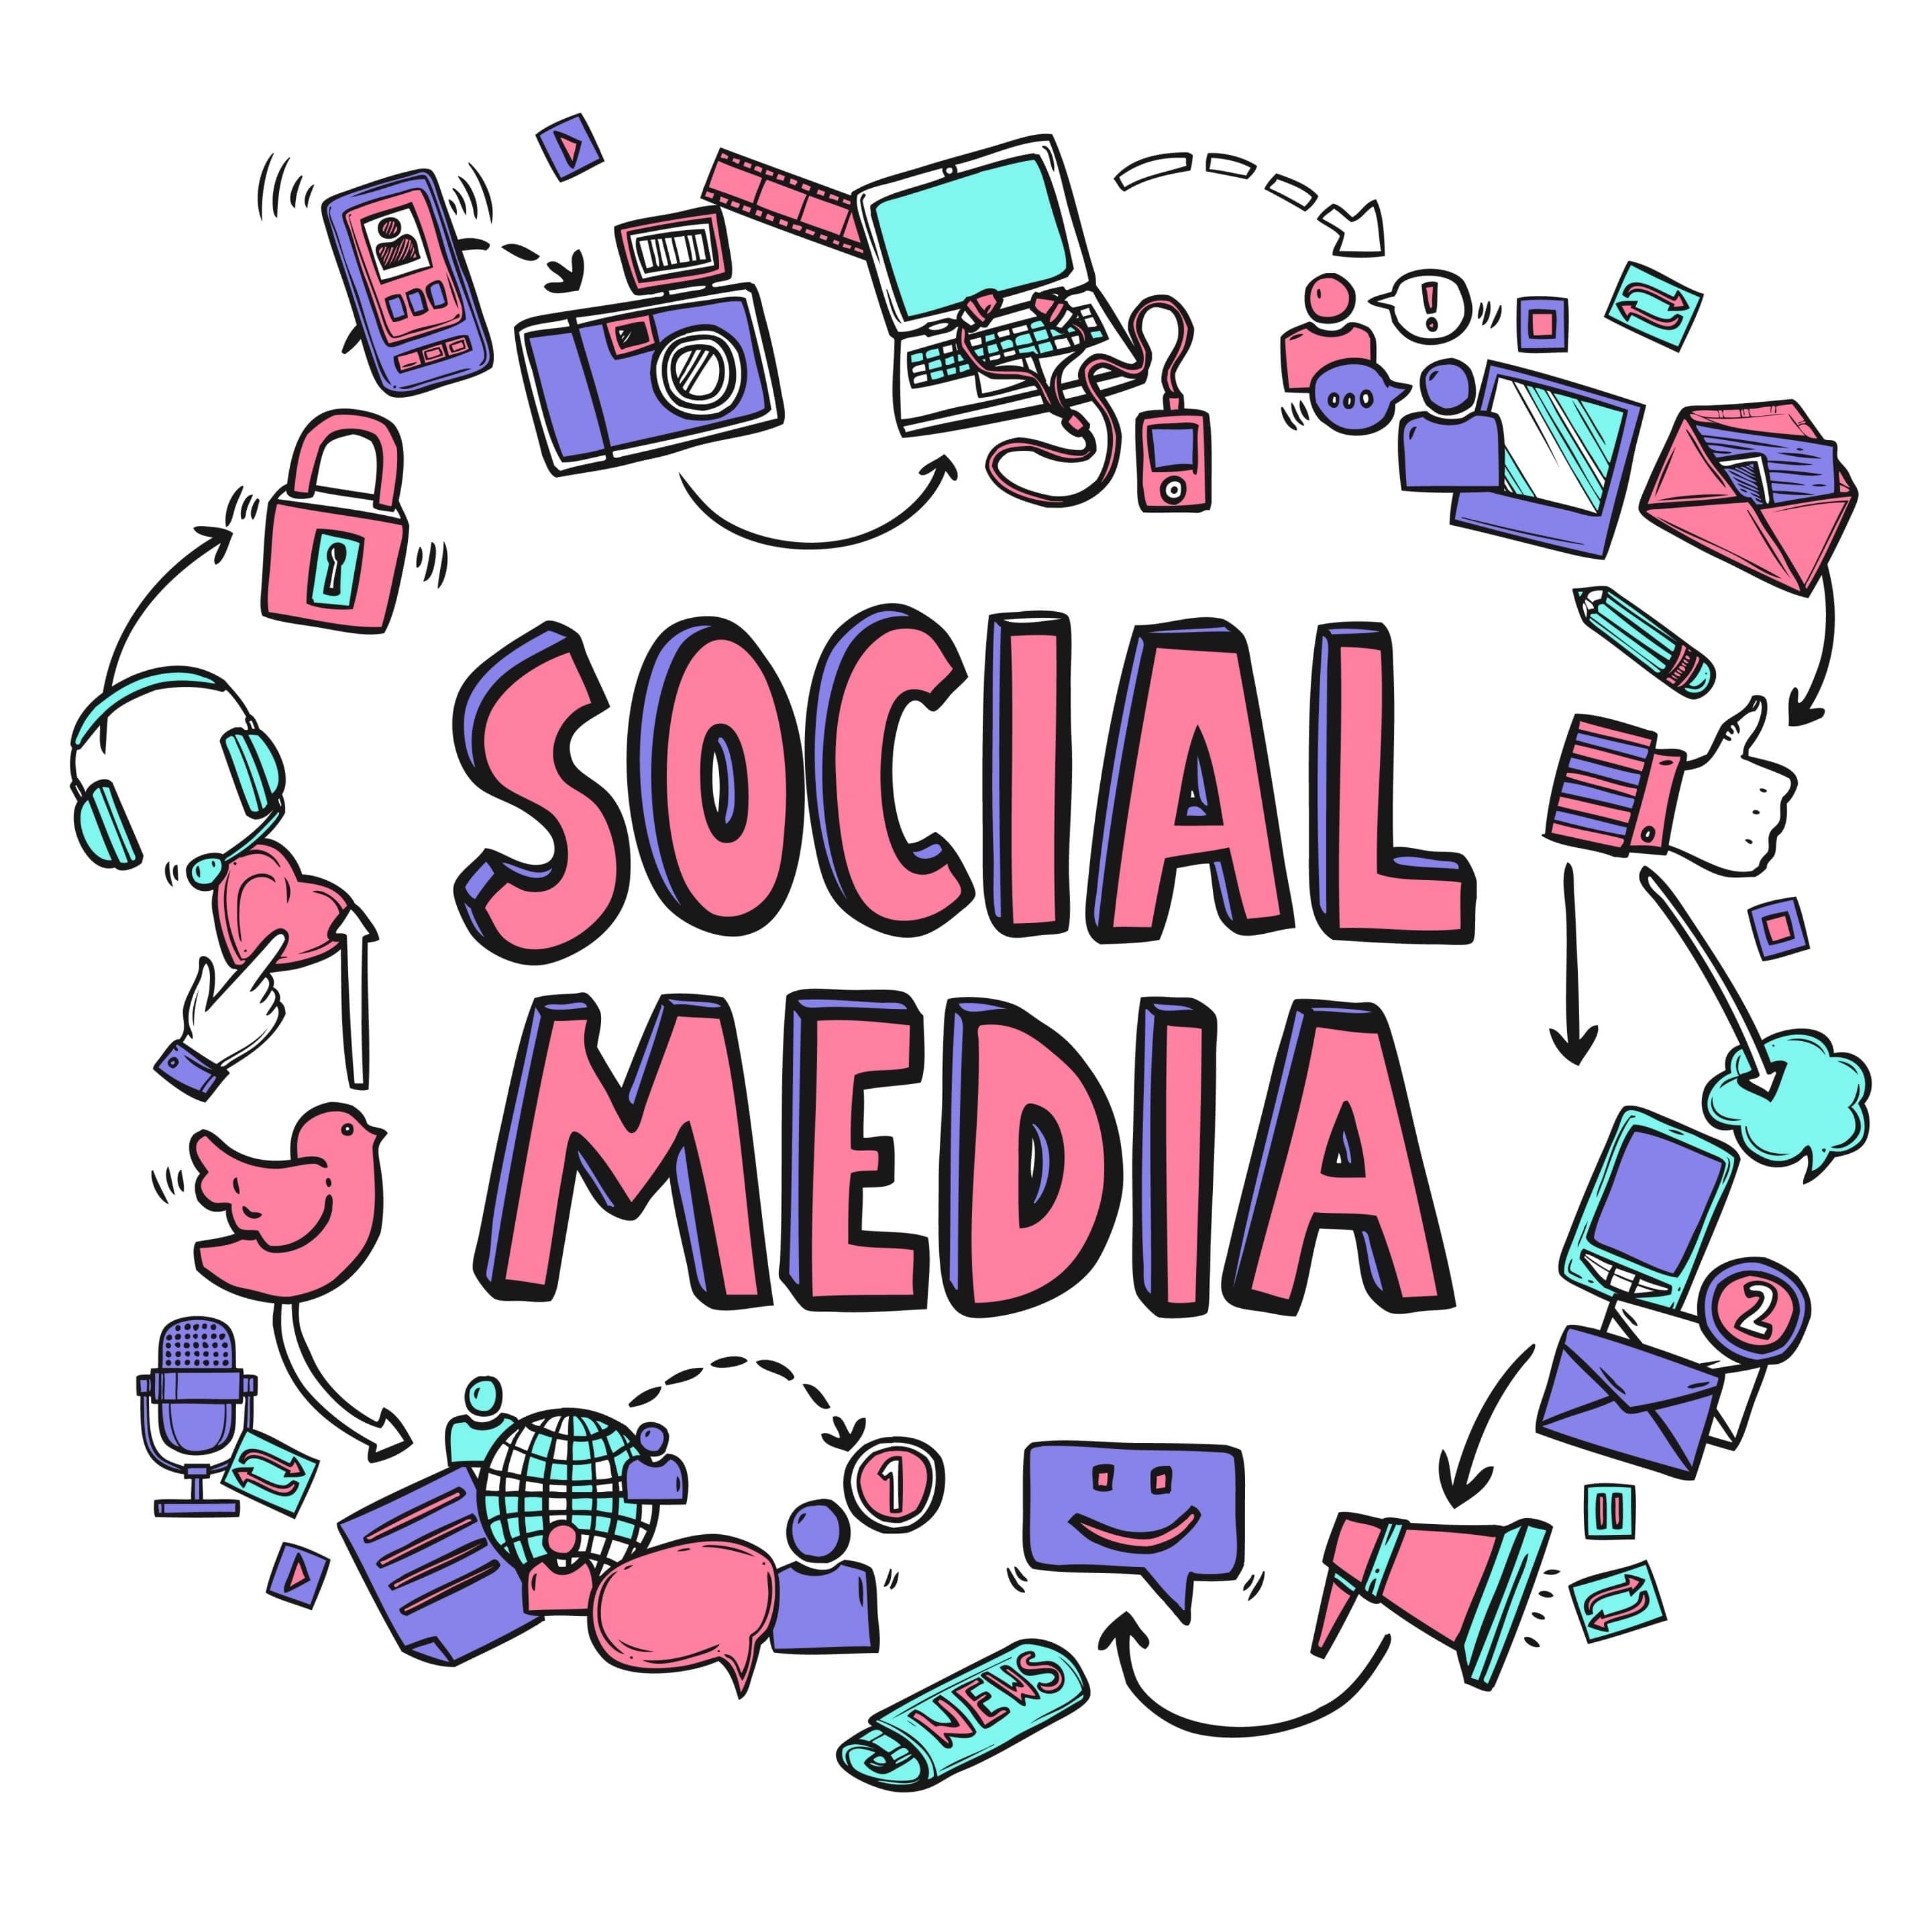 Social media design concept with hand drawn conversation icons vector illustration